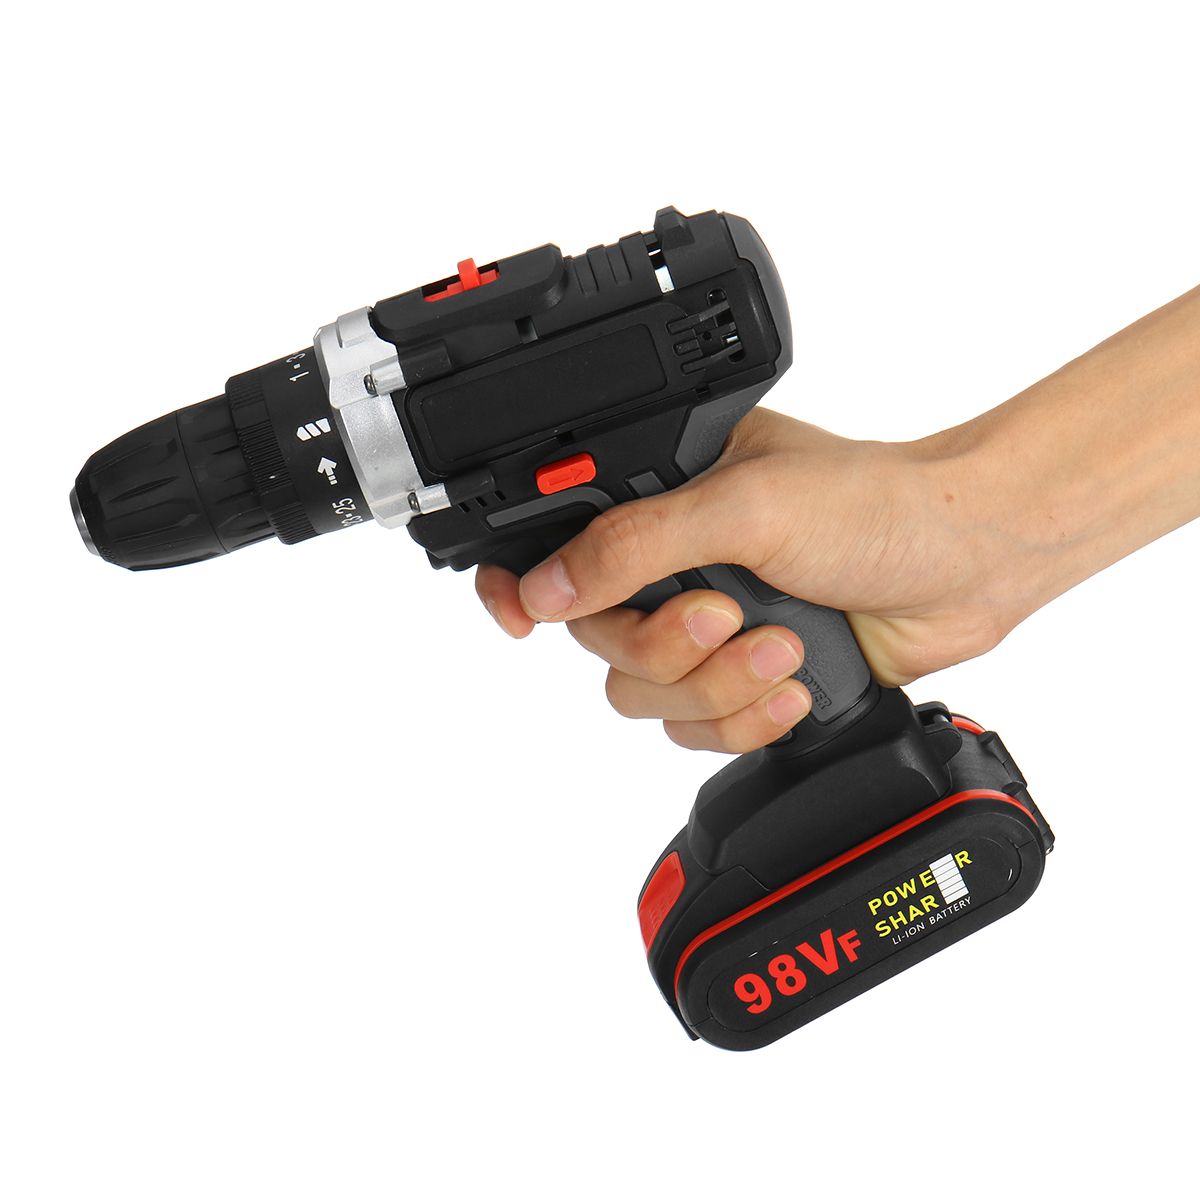 98VF-Electric-Cordless-Impact-Drill-Screwdriver-251-Torque-LED-with-2-Battery-1573796